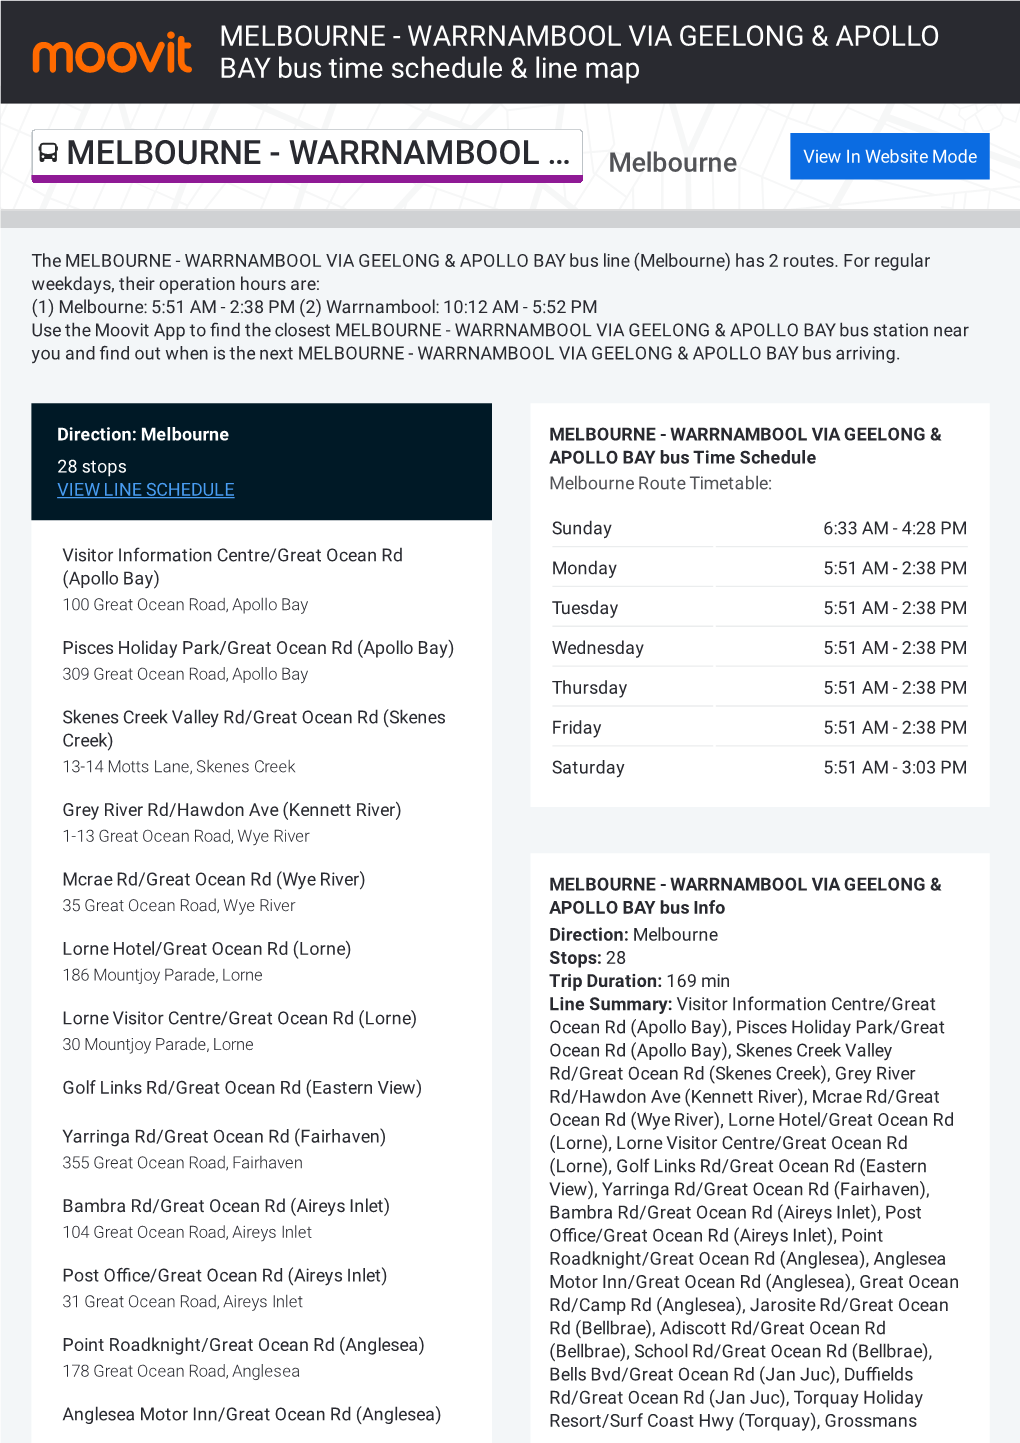 MELBOURNE - WARRNAMBOOL VIA GEELONG & APOLLO BAY Bus Time Schedule & Line Map